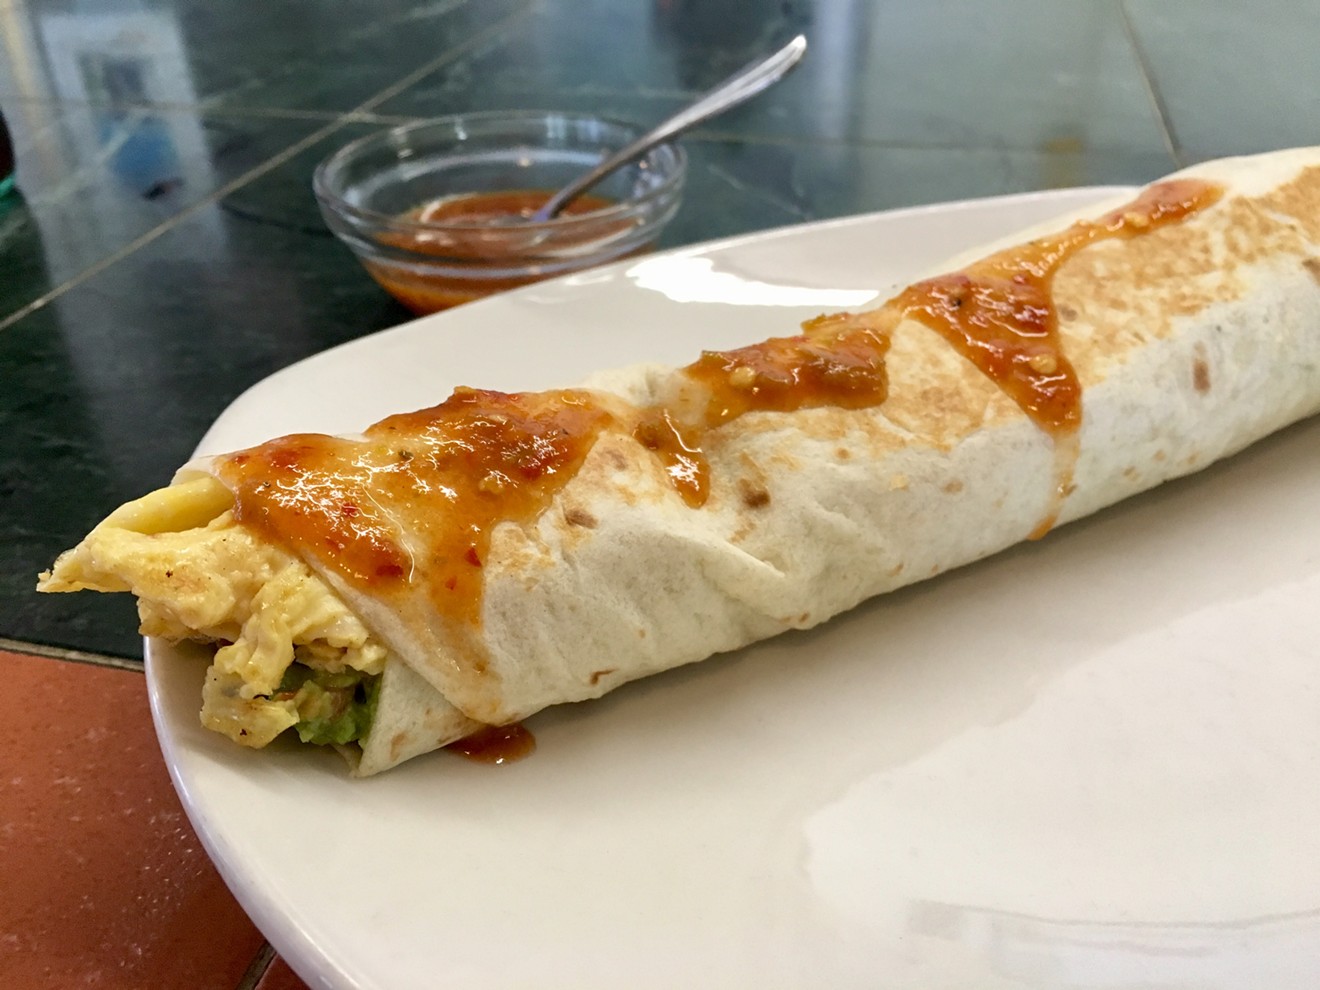 La Victoria's Don's Delight breakfast burrito is named after a longtime patron and filled with scrambled eggs, bacon, guacamole and onion.